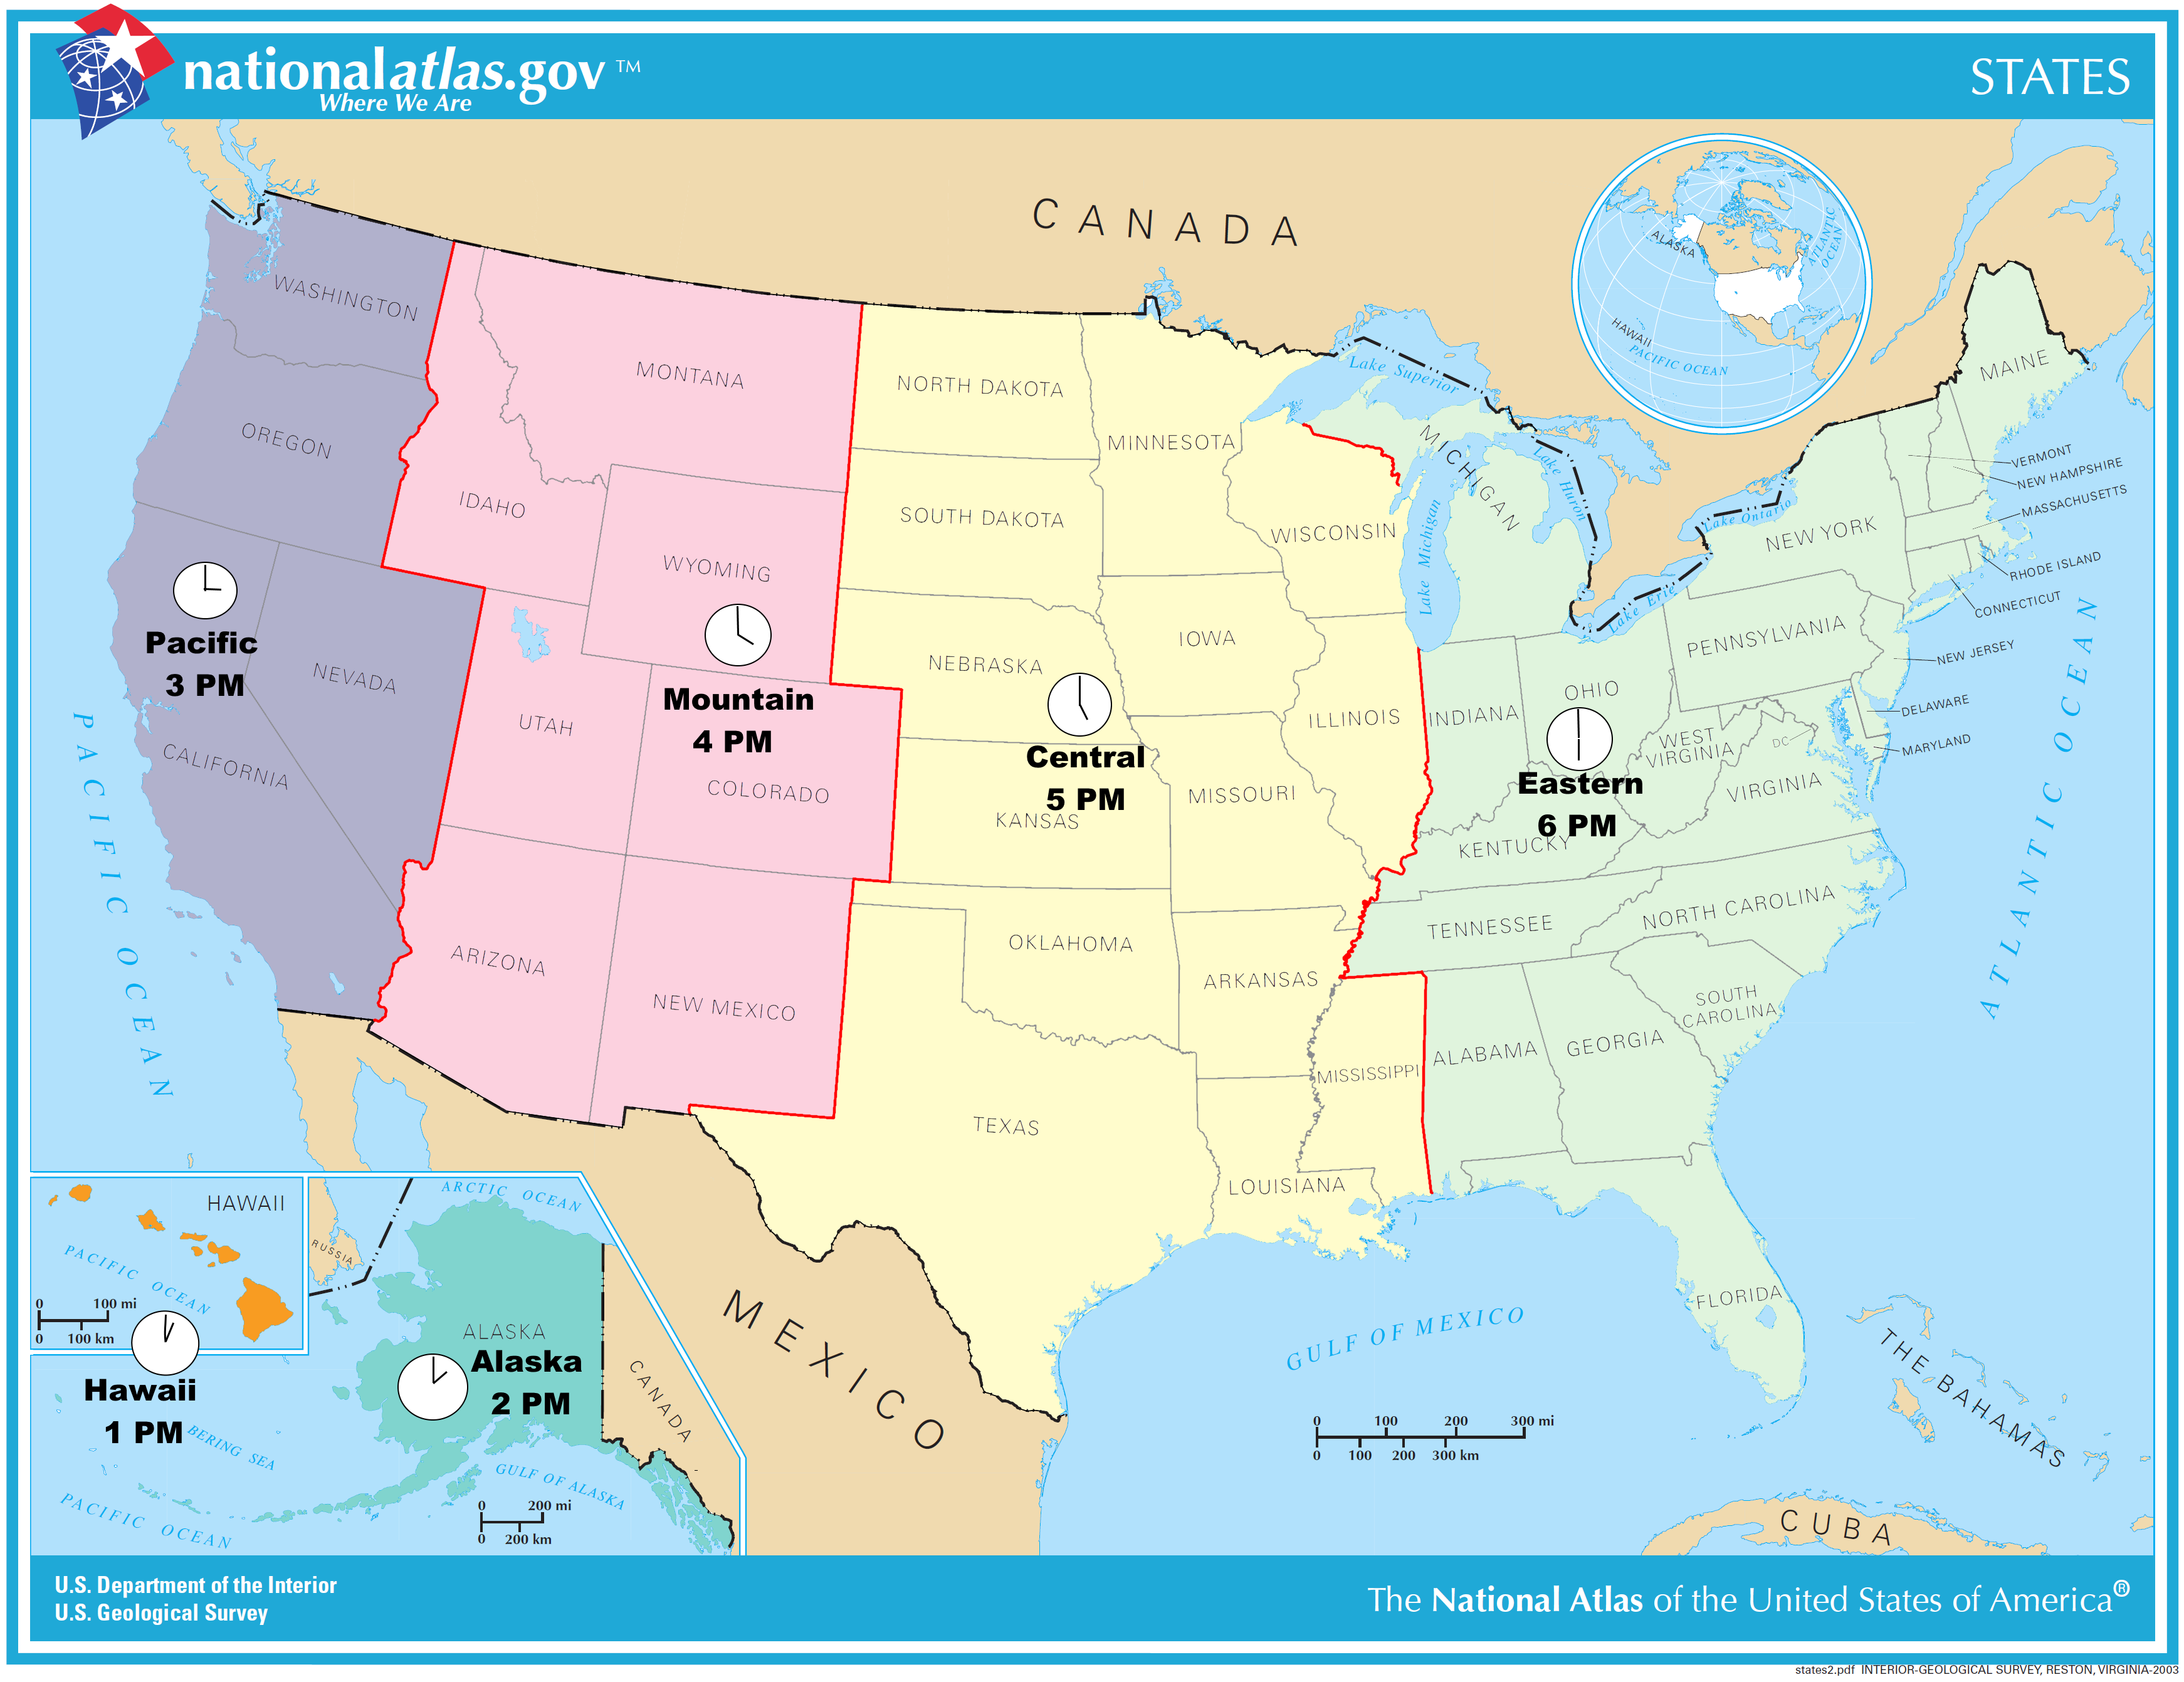 Proposed Simplified Time Zone Map Of The United States 